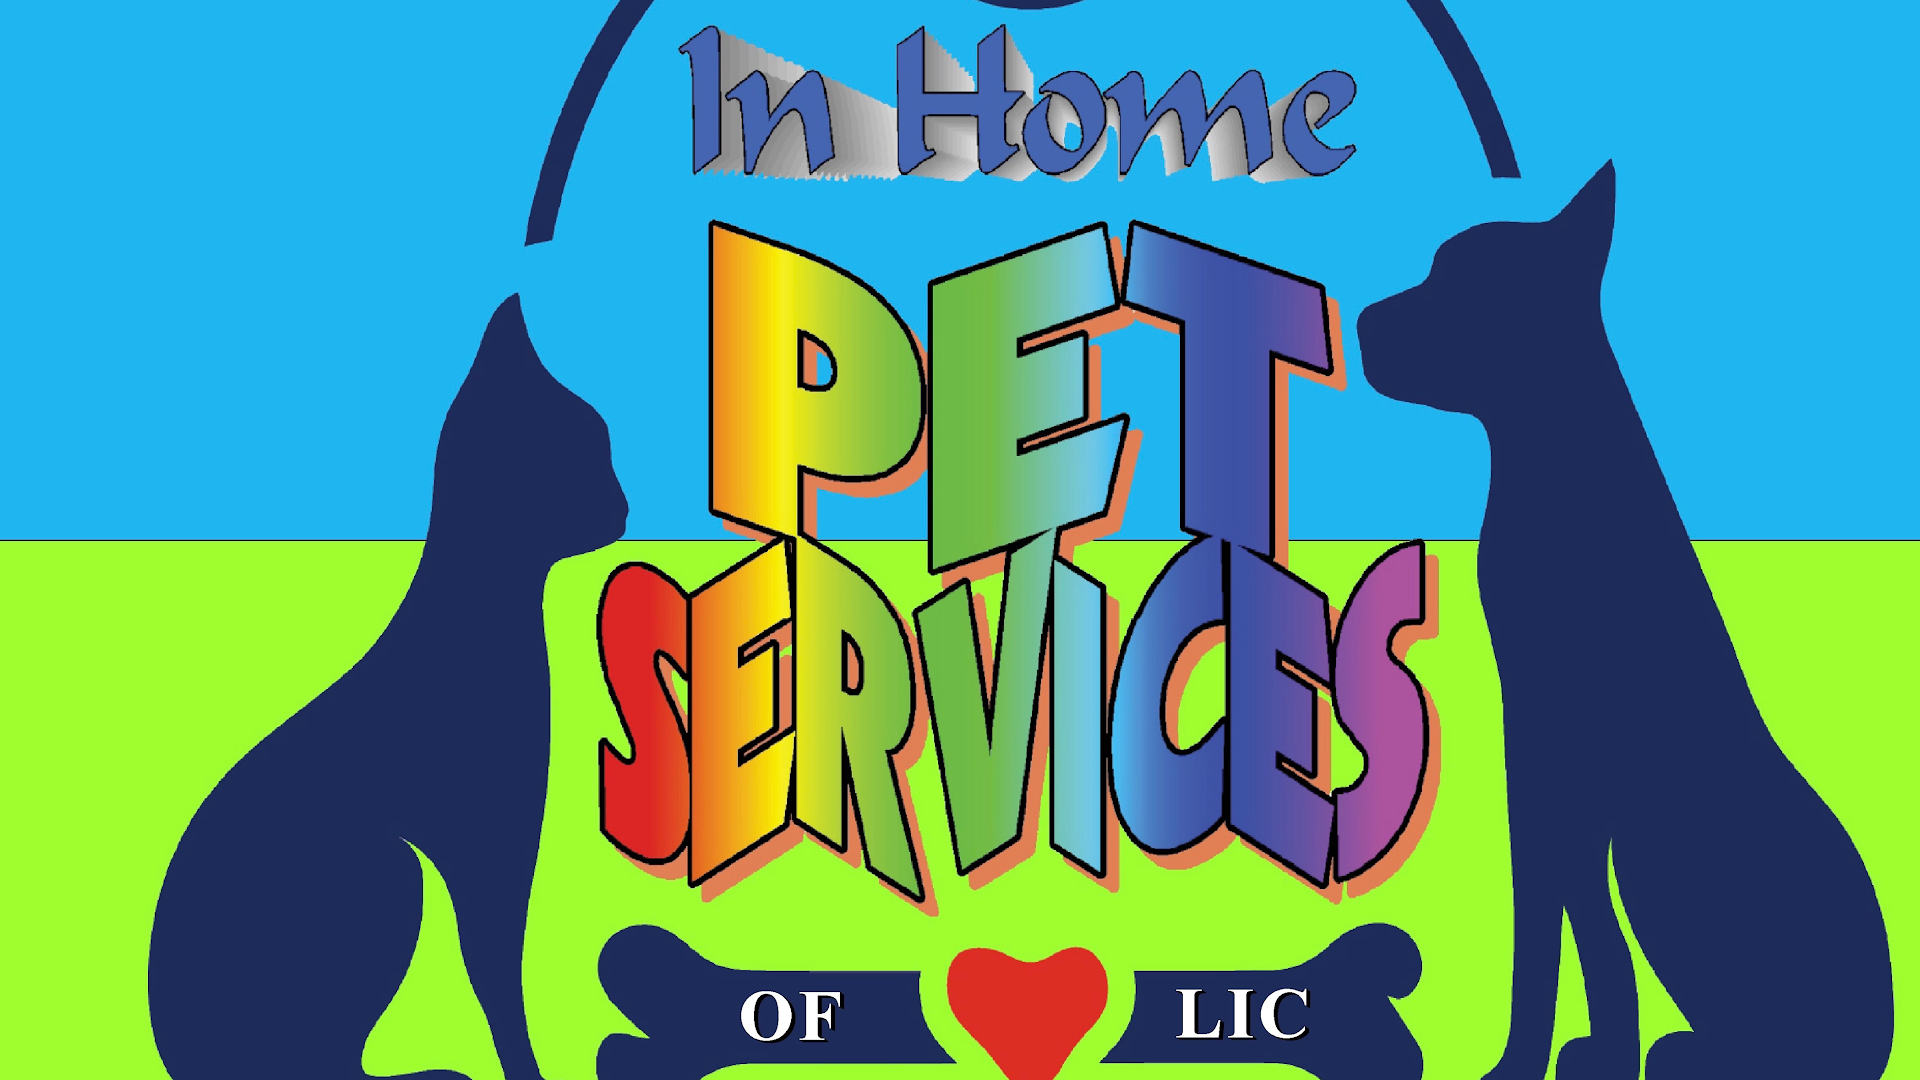 In Home Pet Services of LIC